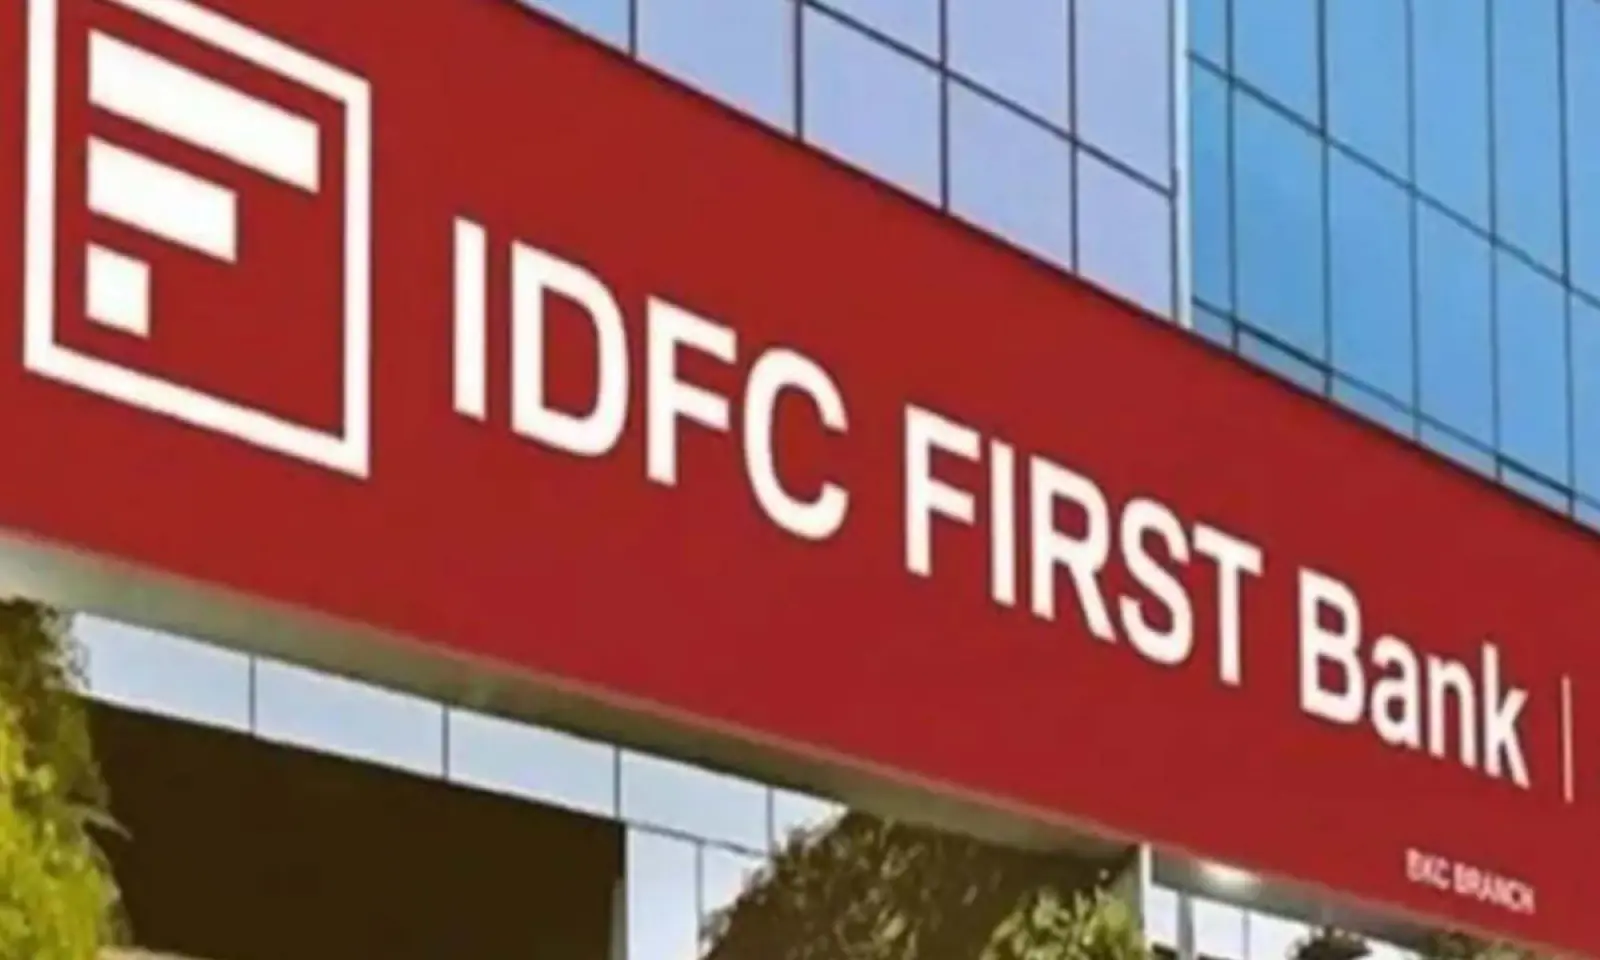 IDFC FIRST Bank Reports Strong Financial Performance with 18% YoY Growth in Profit After Tax